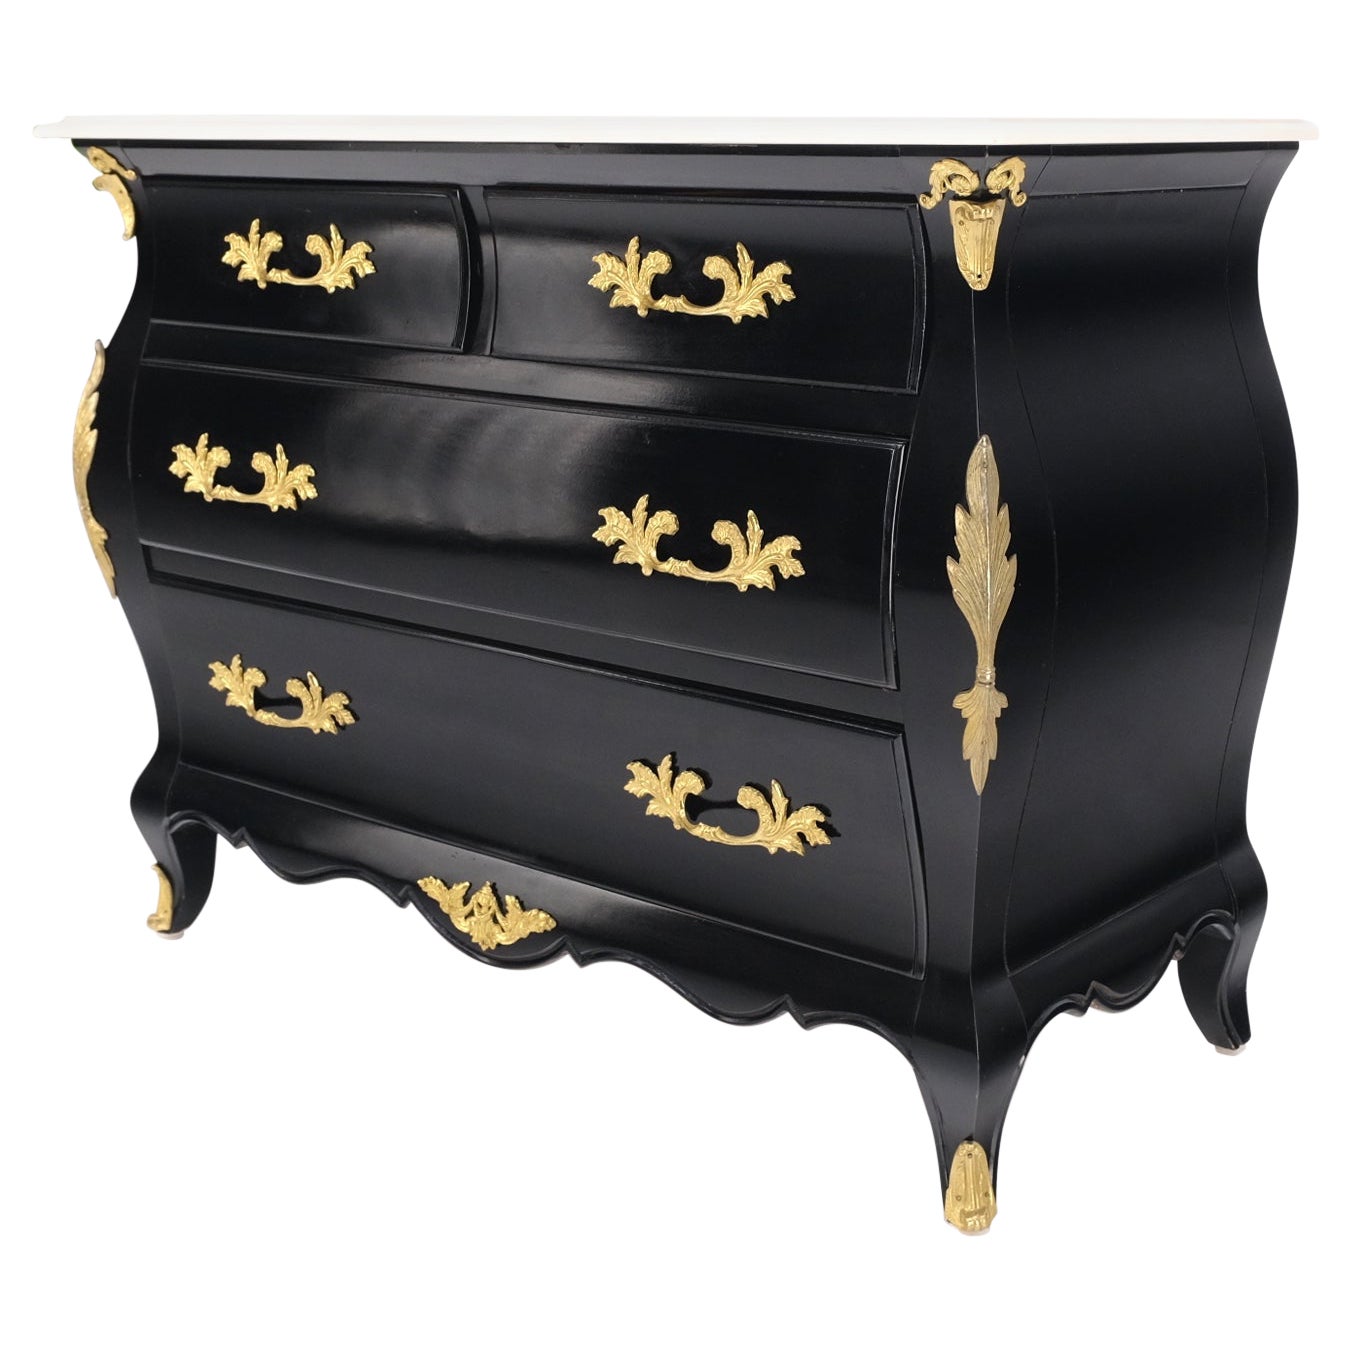 Marble Top Black Lacquer Brass Mounts 4 Drawer Bombay Dresser Chest Drawers Mint